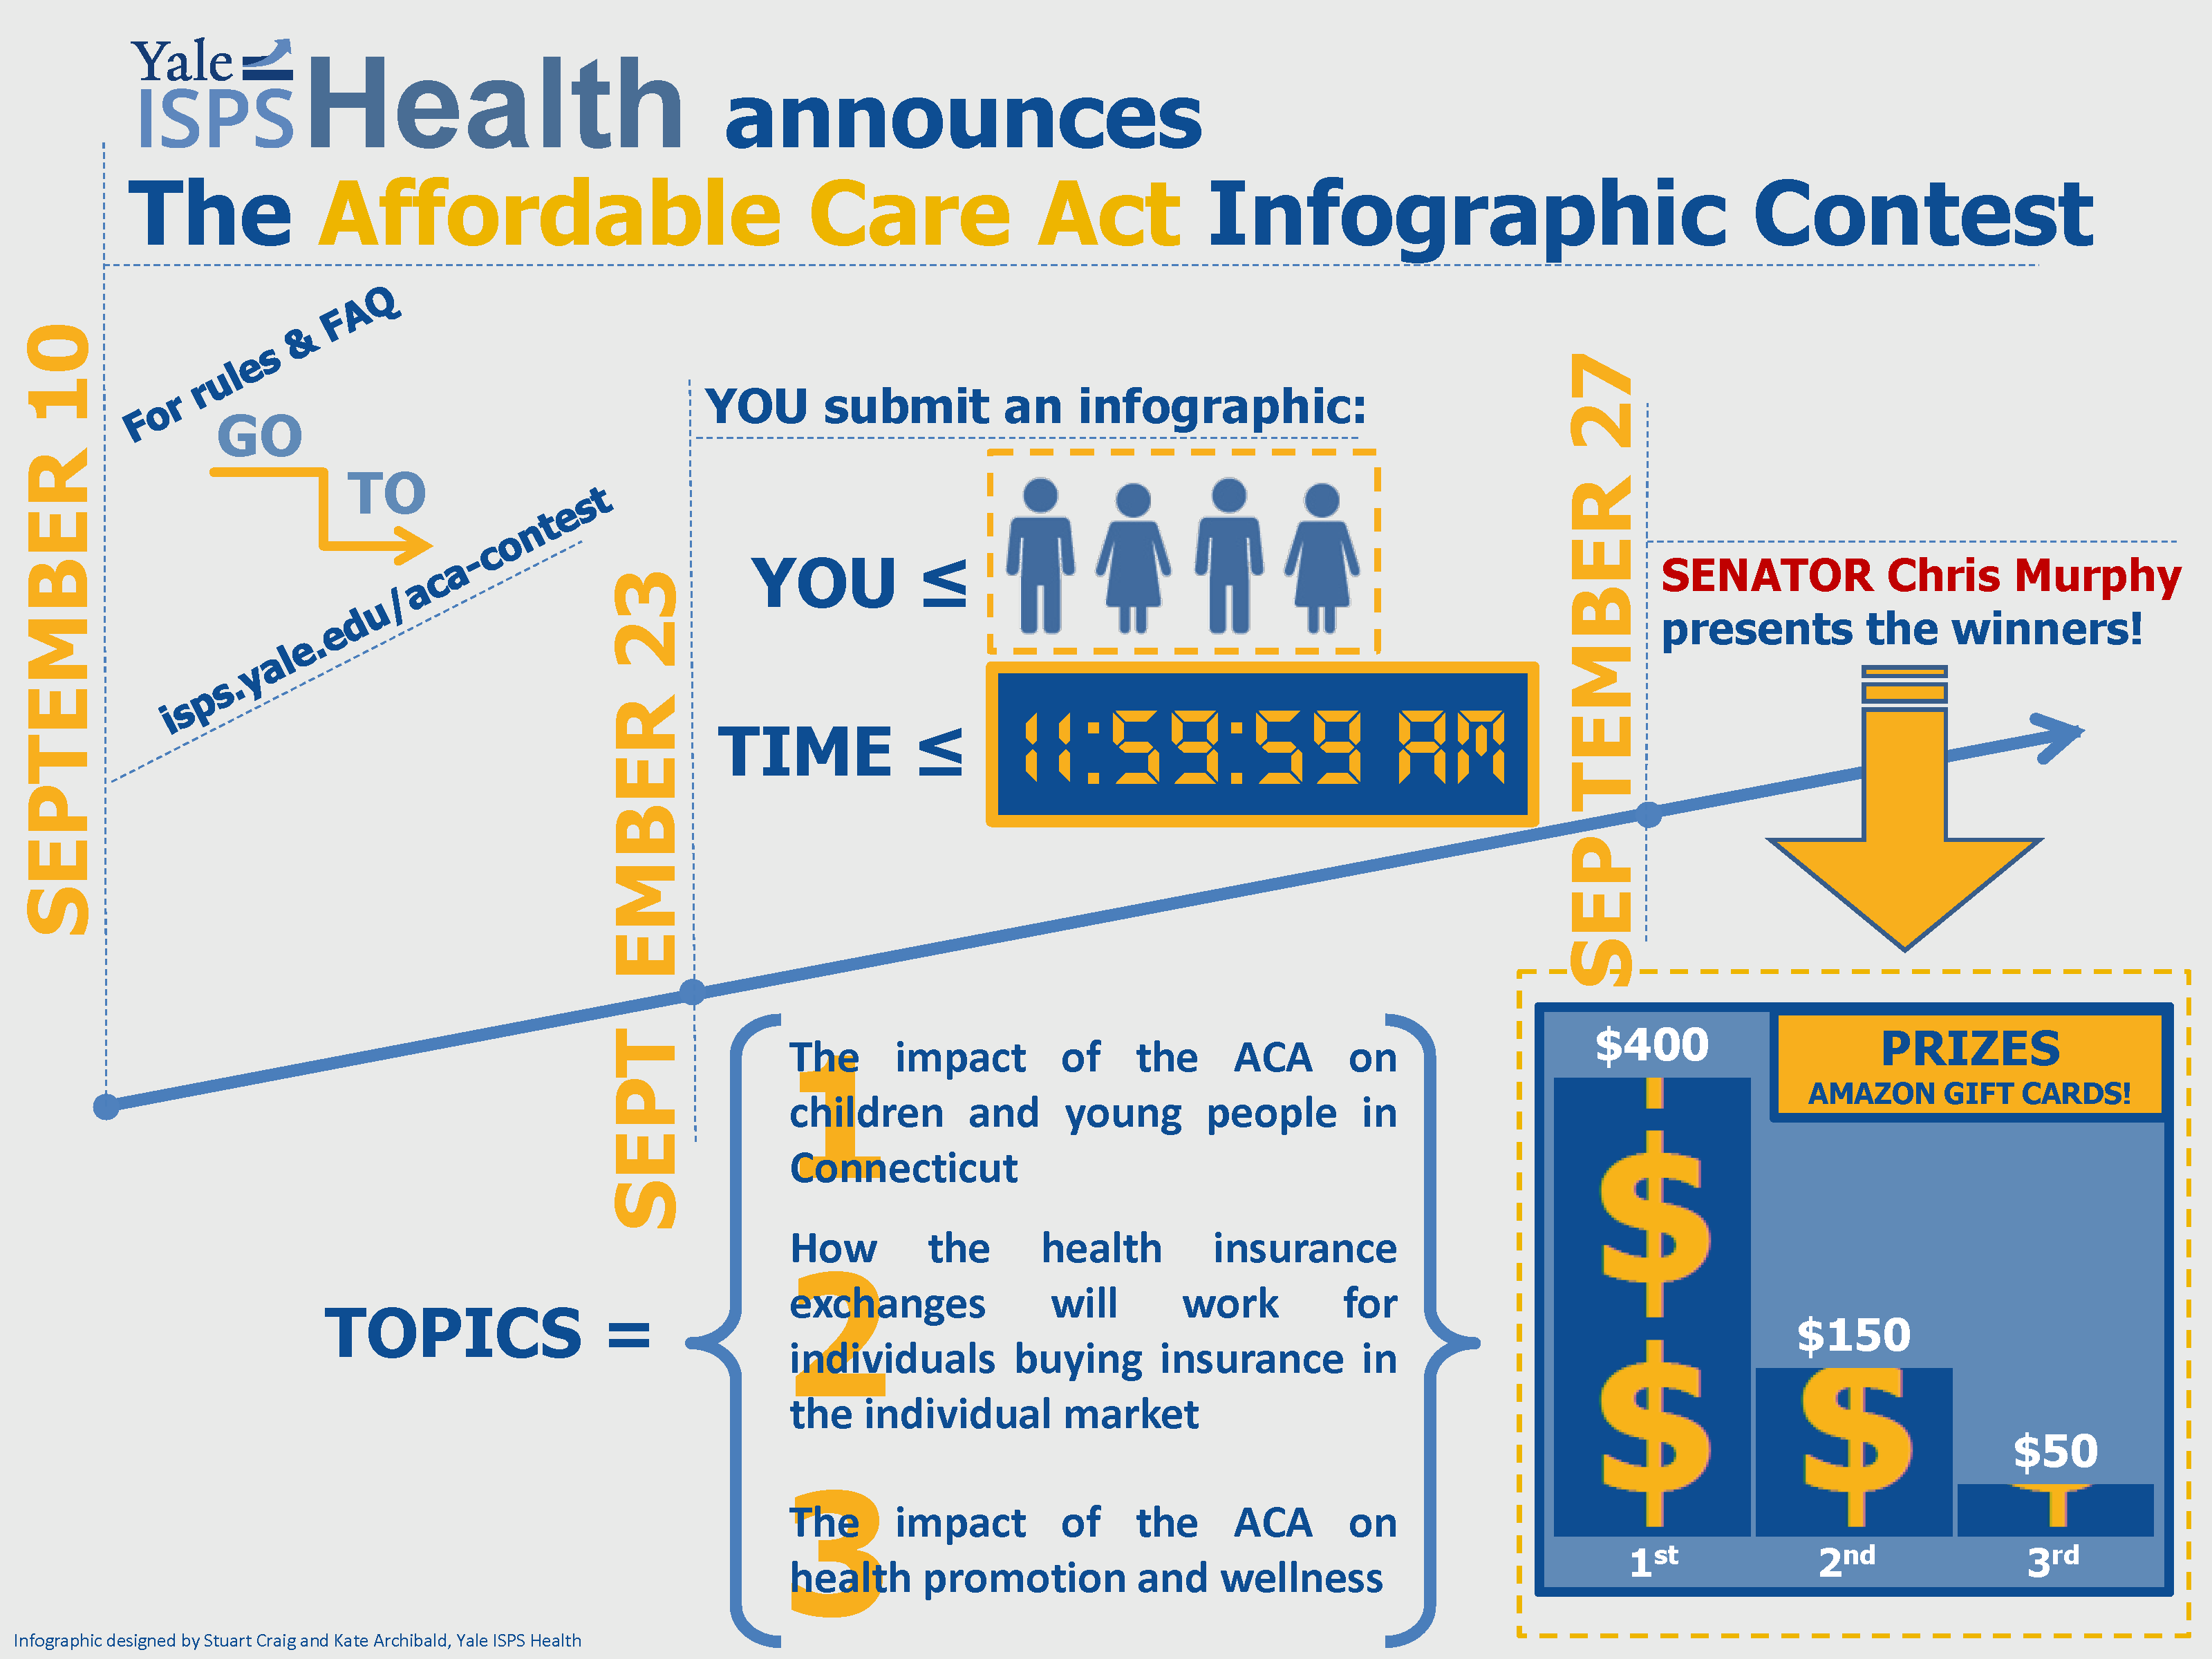 isps-health-at-yale-affordable-care-act-aca-infographic-contest